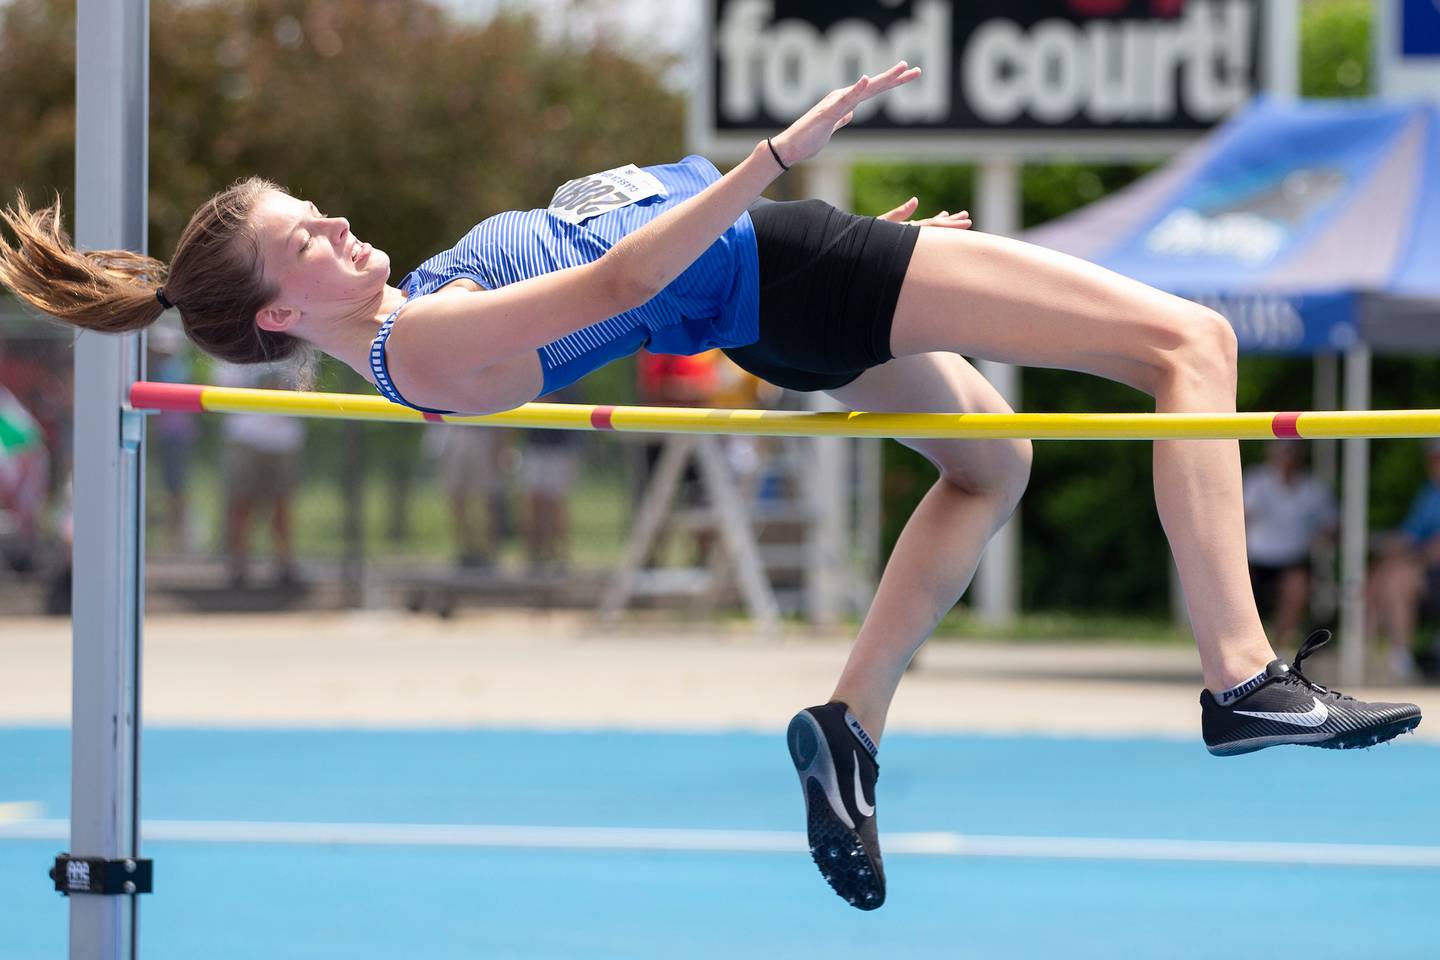 Woodstock's Hallie Steponaitis competes in the Class 2A high jump during IHSA Girls Track and Field State Meet on June 11, 2021 in Charleston.